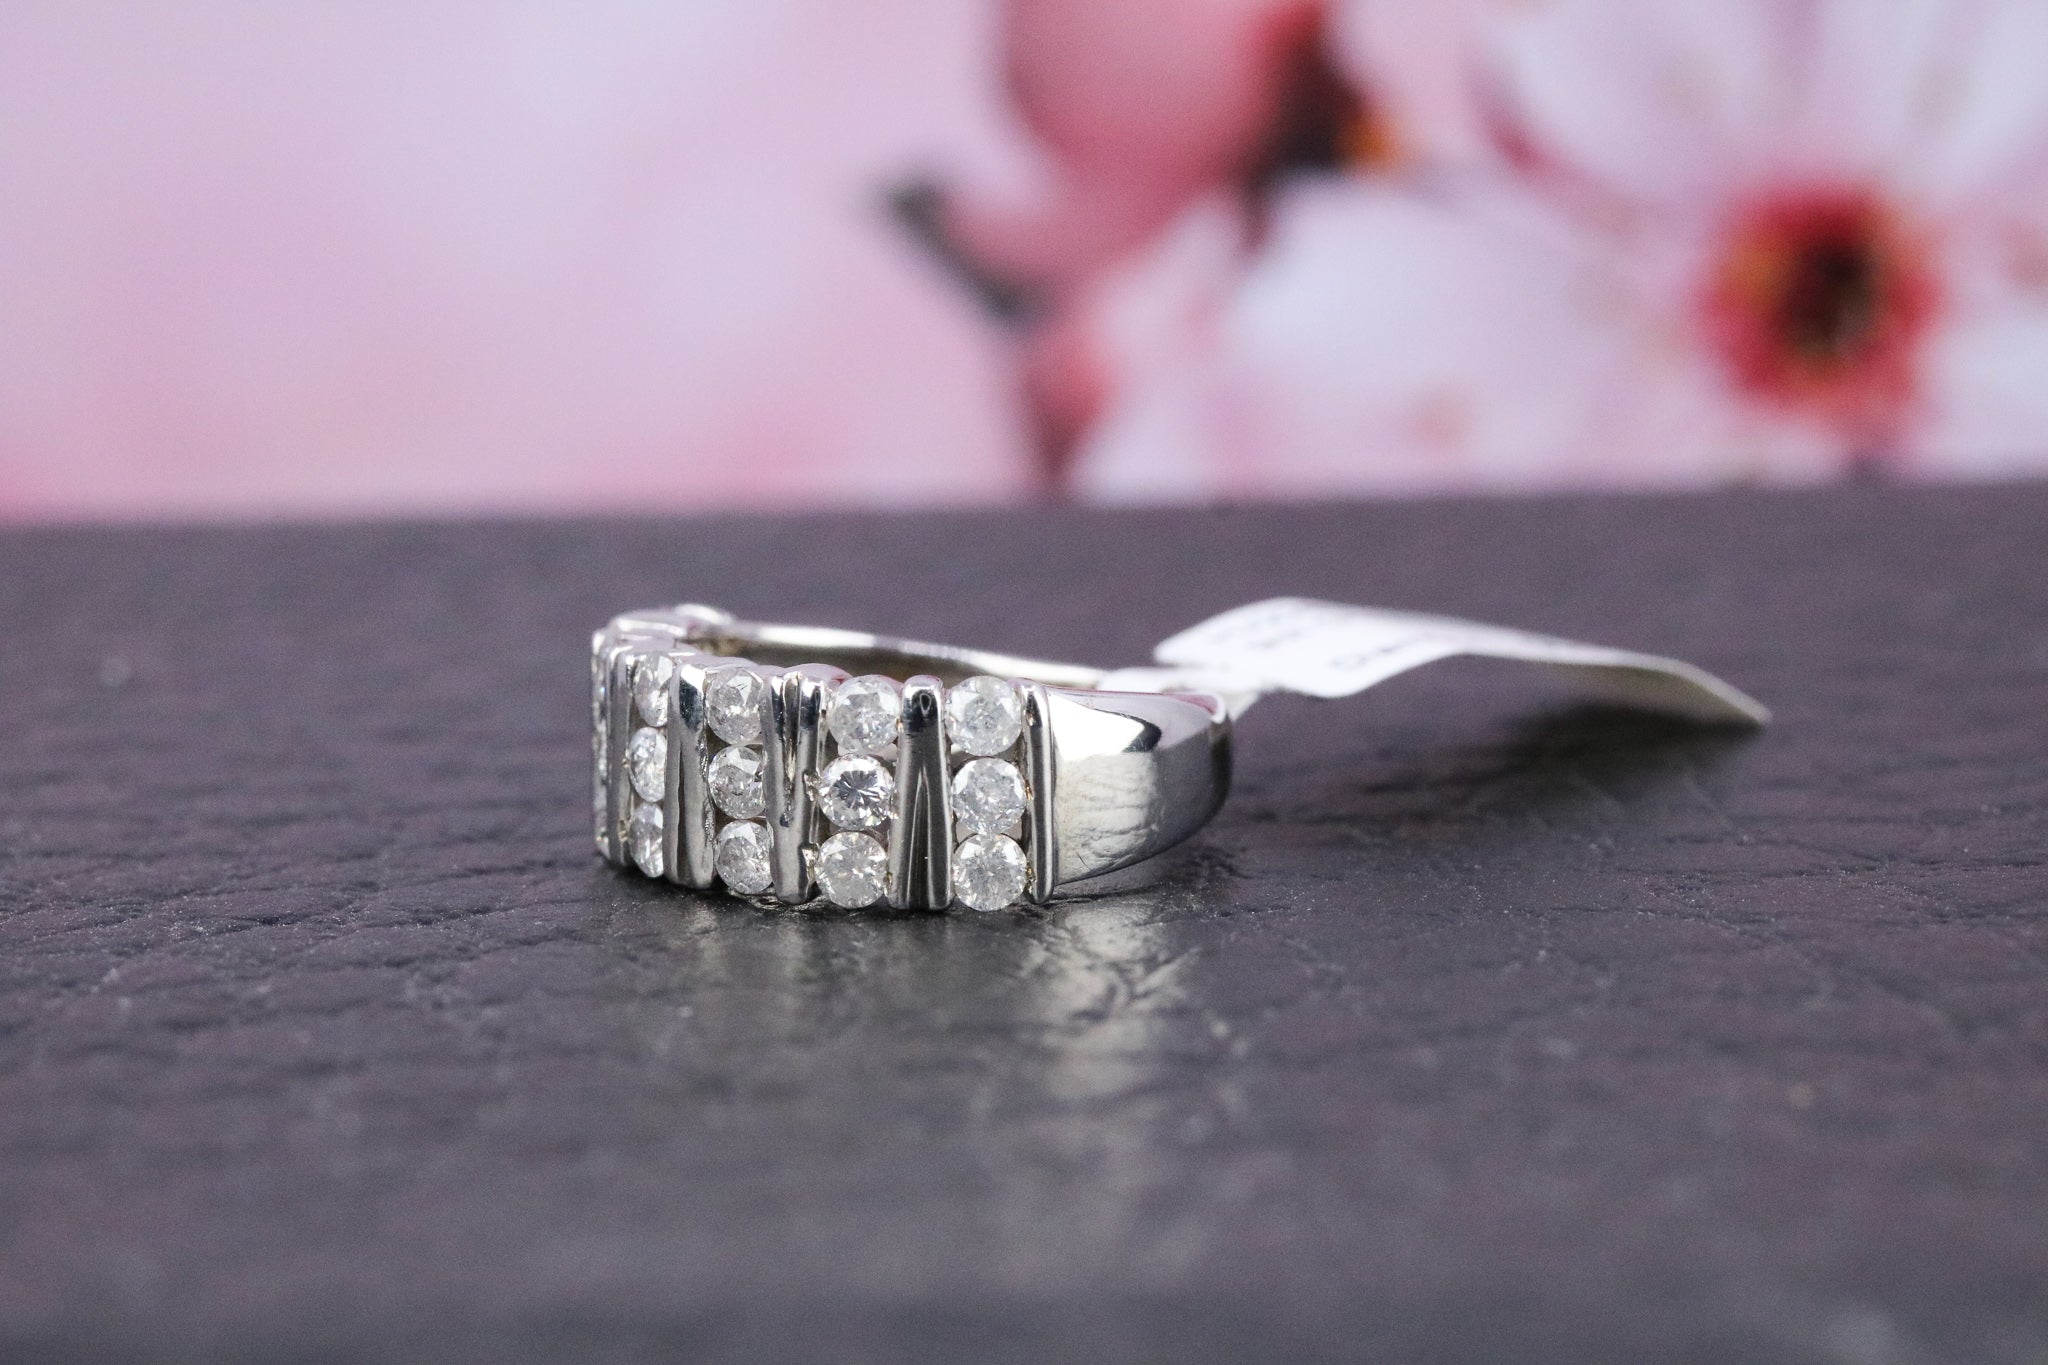 9ct White Gold Diamond Ring - HJ2283 - Hallmark Jewellers Formby & The Jewellers Bench Widnes